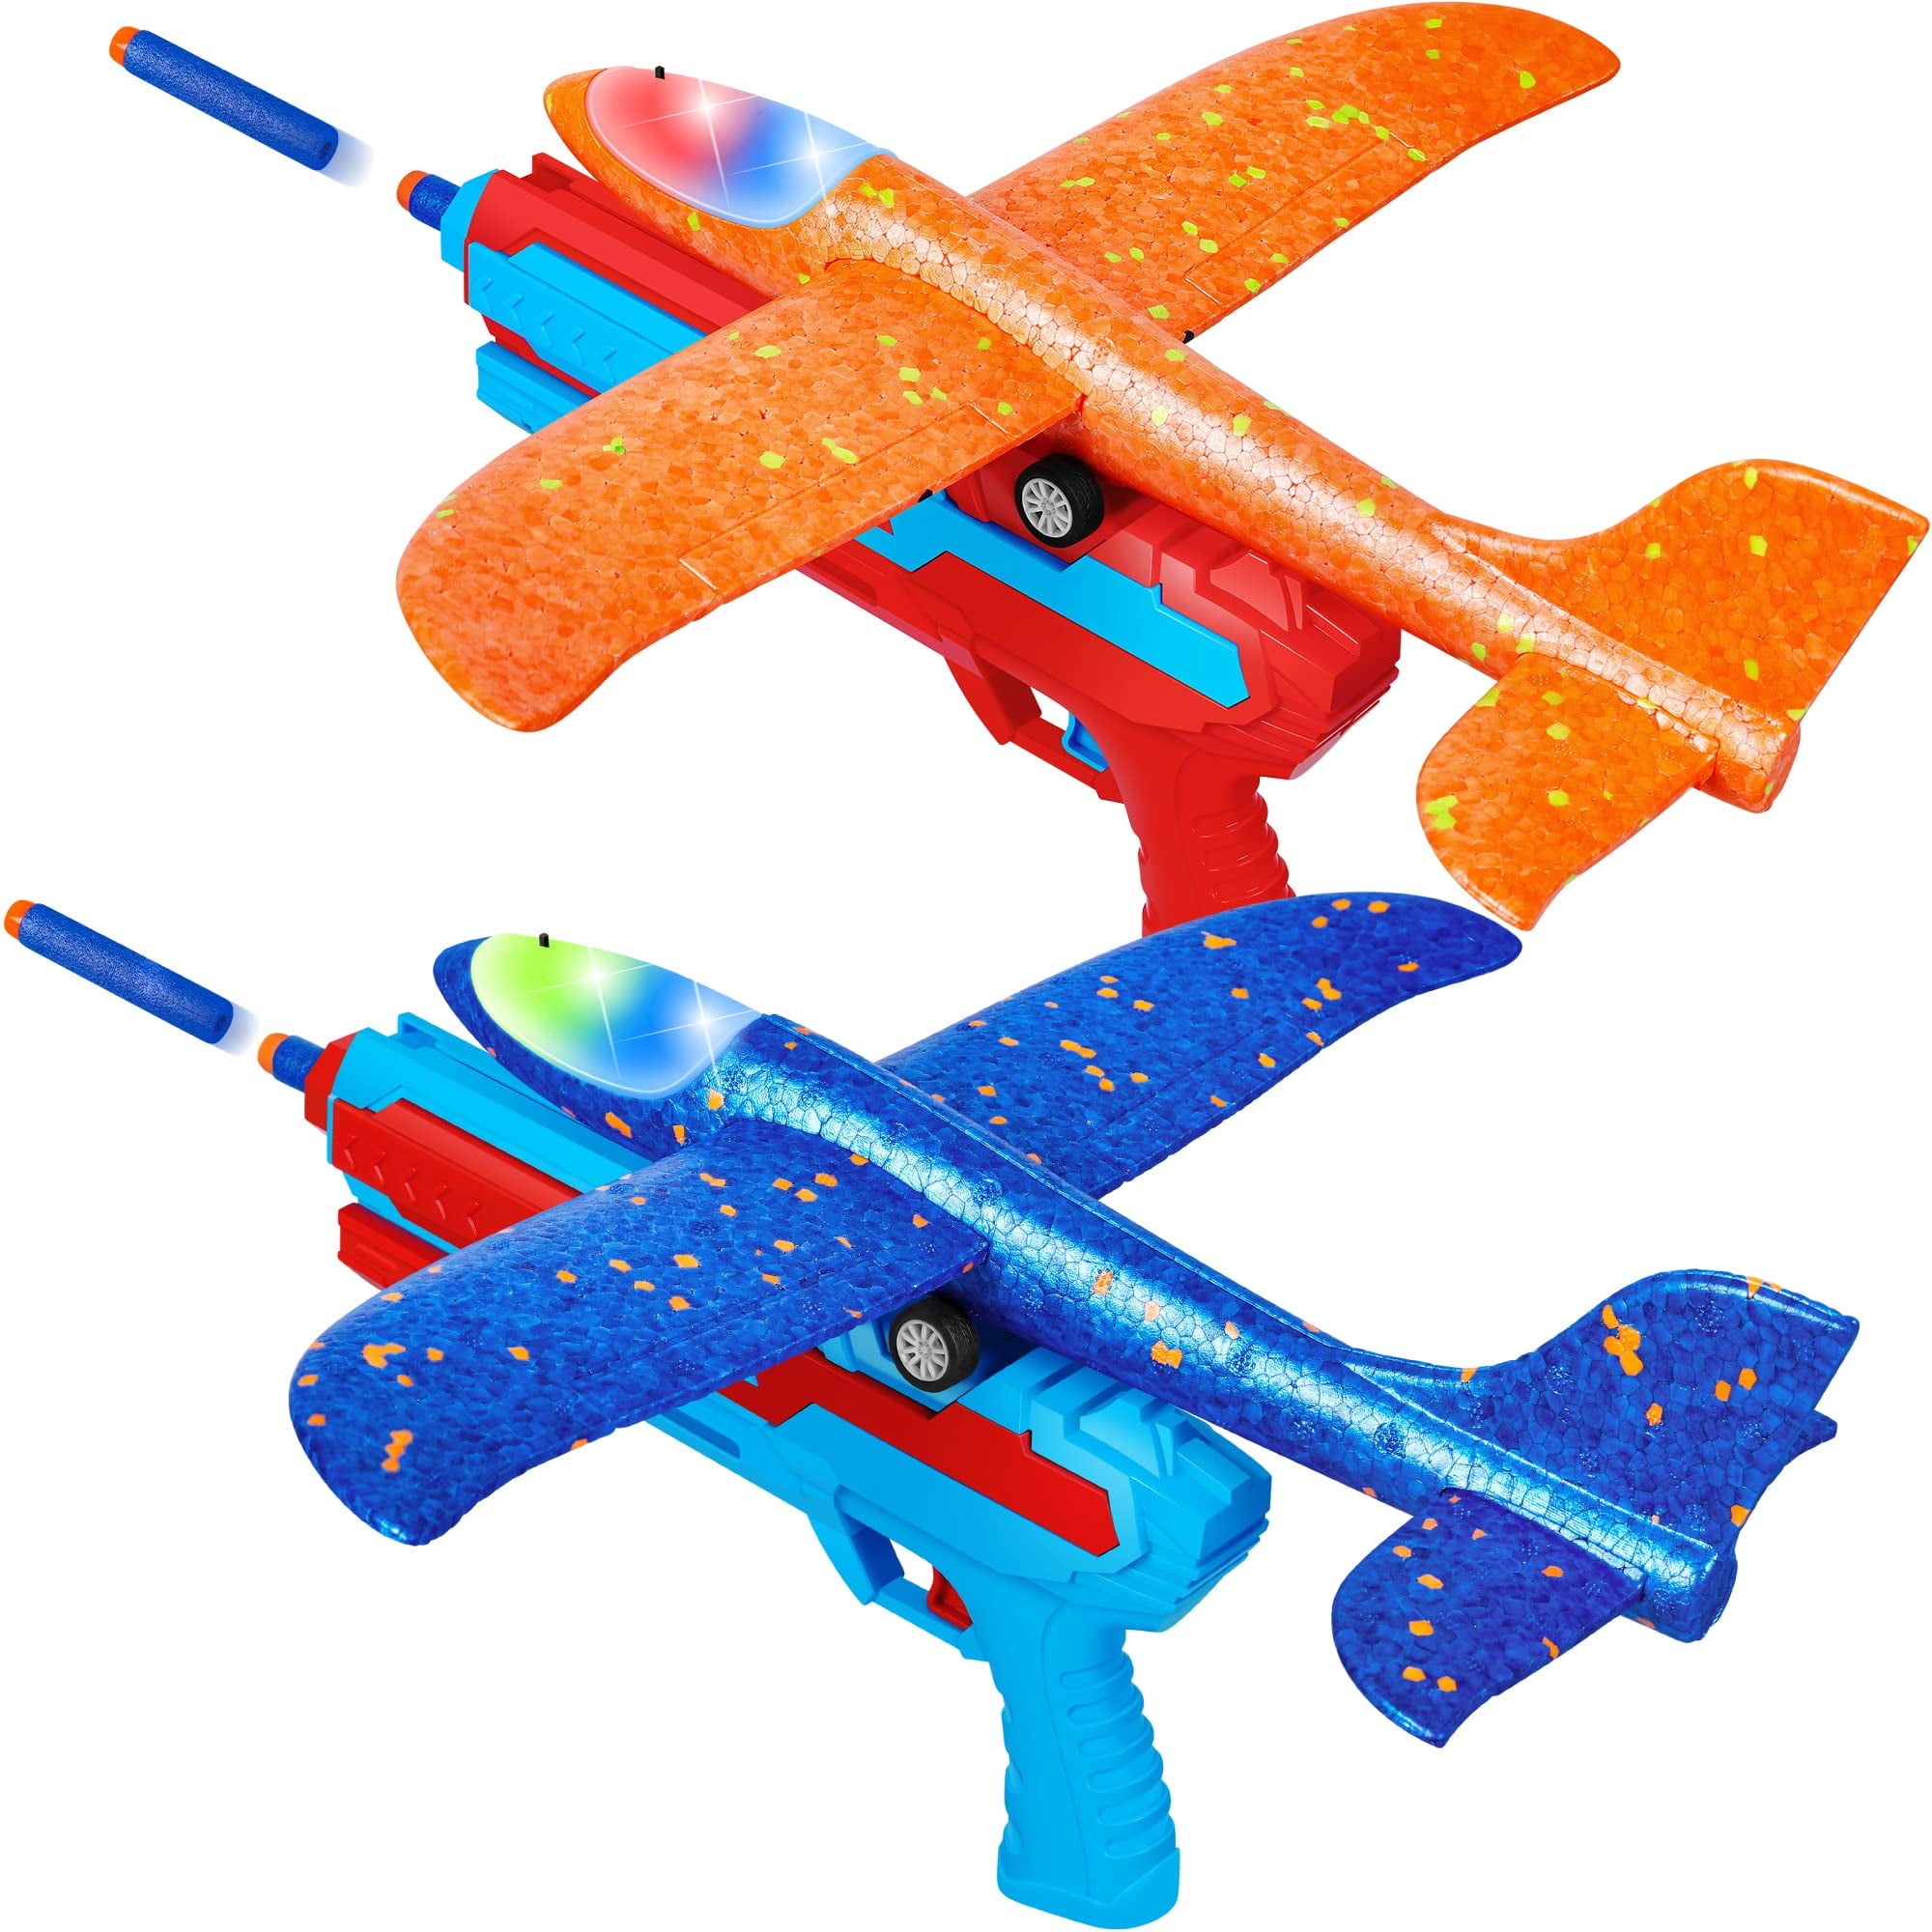 2 Pack Airplane Toys with Launcher, 2 Flight Modes LED Foam Glider Catapult Plane Toy, Outdoor Flying Toy for Kids, Gifts for 3 4 5 6 7 8 9 Years Old Boys Girls, Airplane Birthday Party Supplies